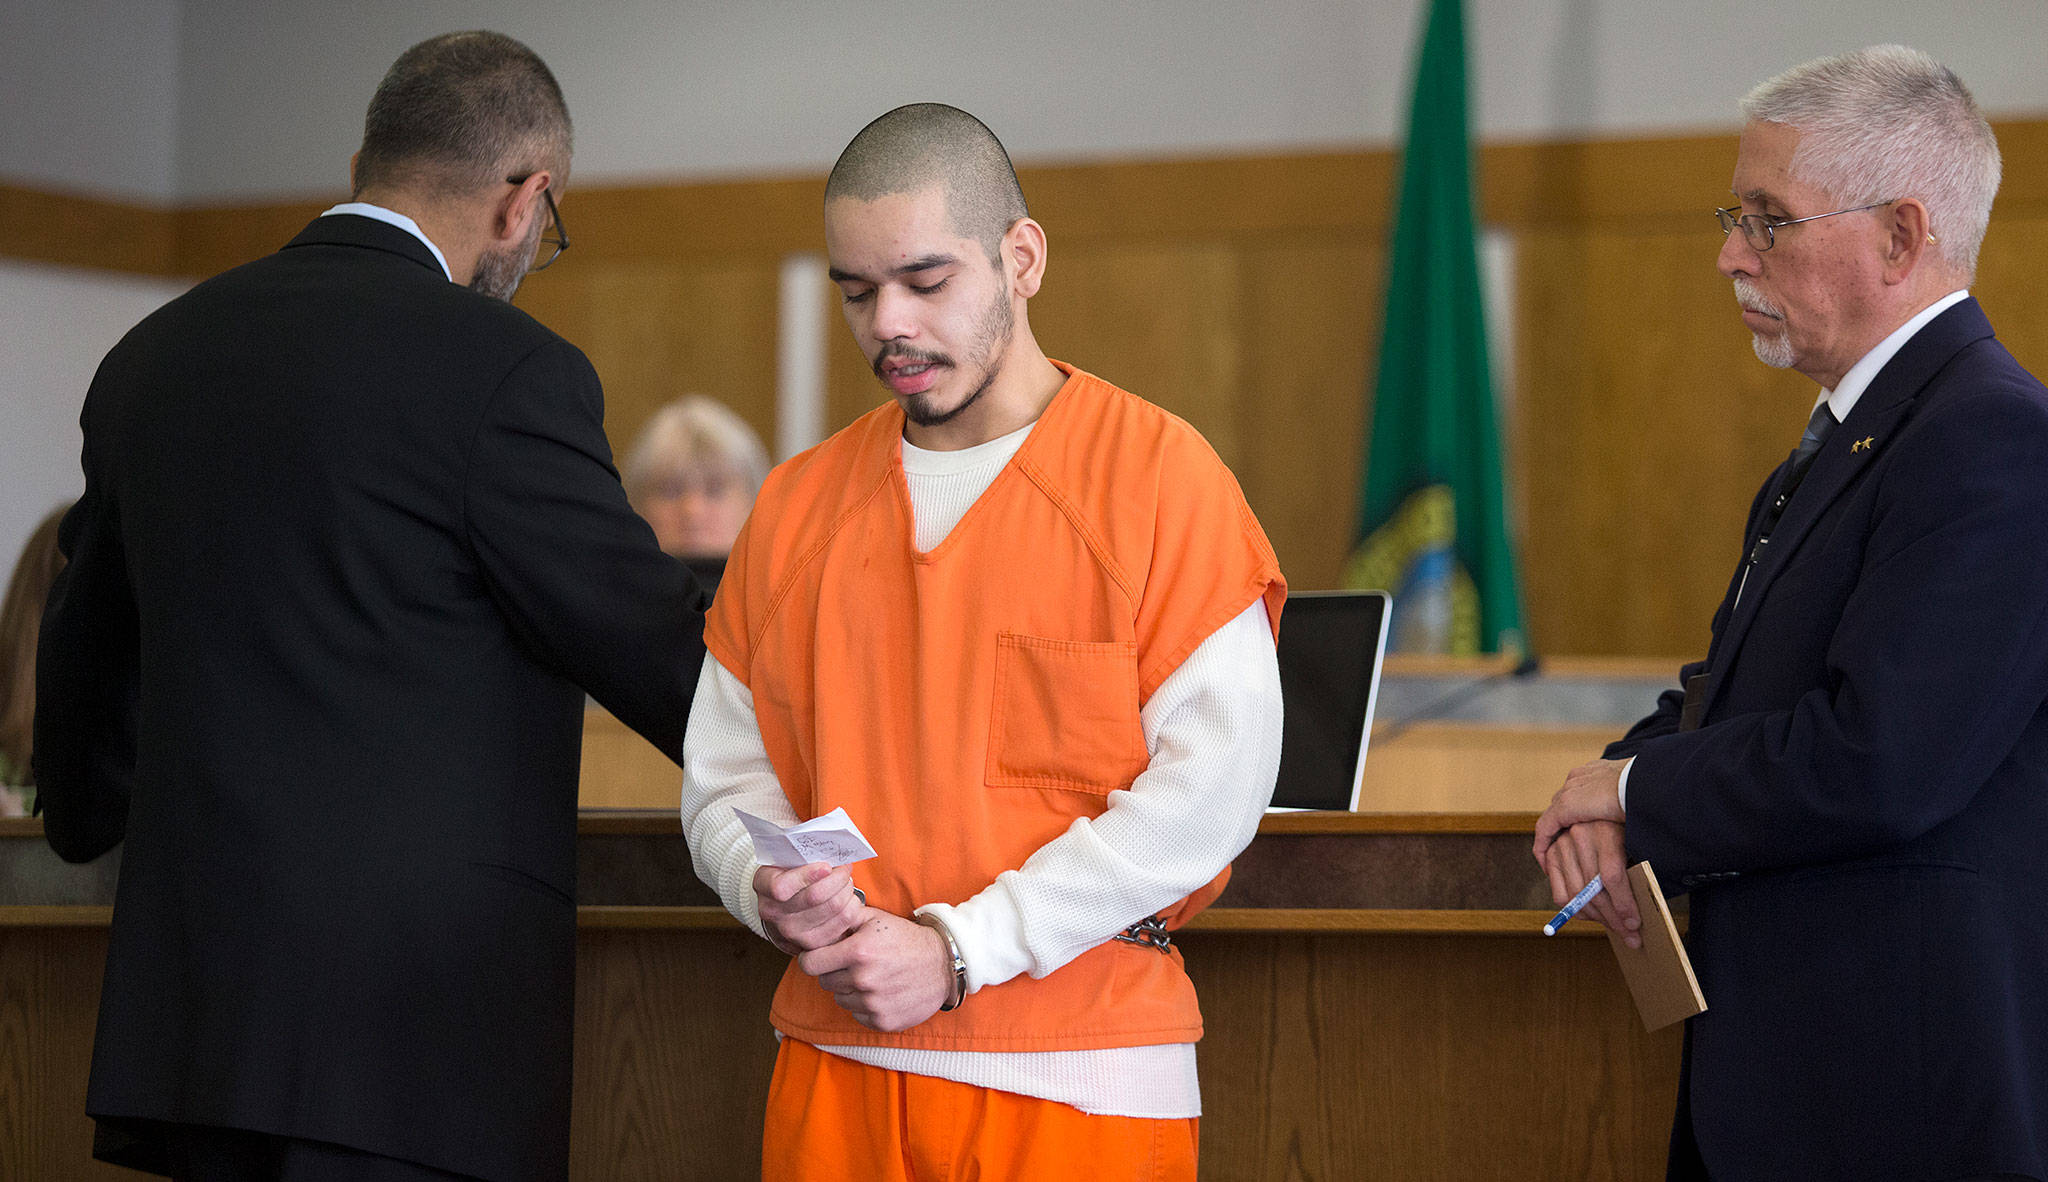 Anthony Hernandez-Cano reads a letter to the families of the two men he tortured and killed in July. A judge sentenced him to life in prison at the Snohomish County Courthouse on Tuesday in Everett. (Andy Bronson / The Herald)